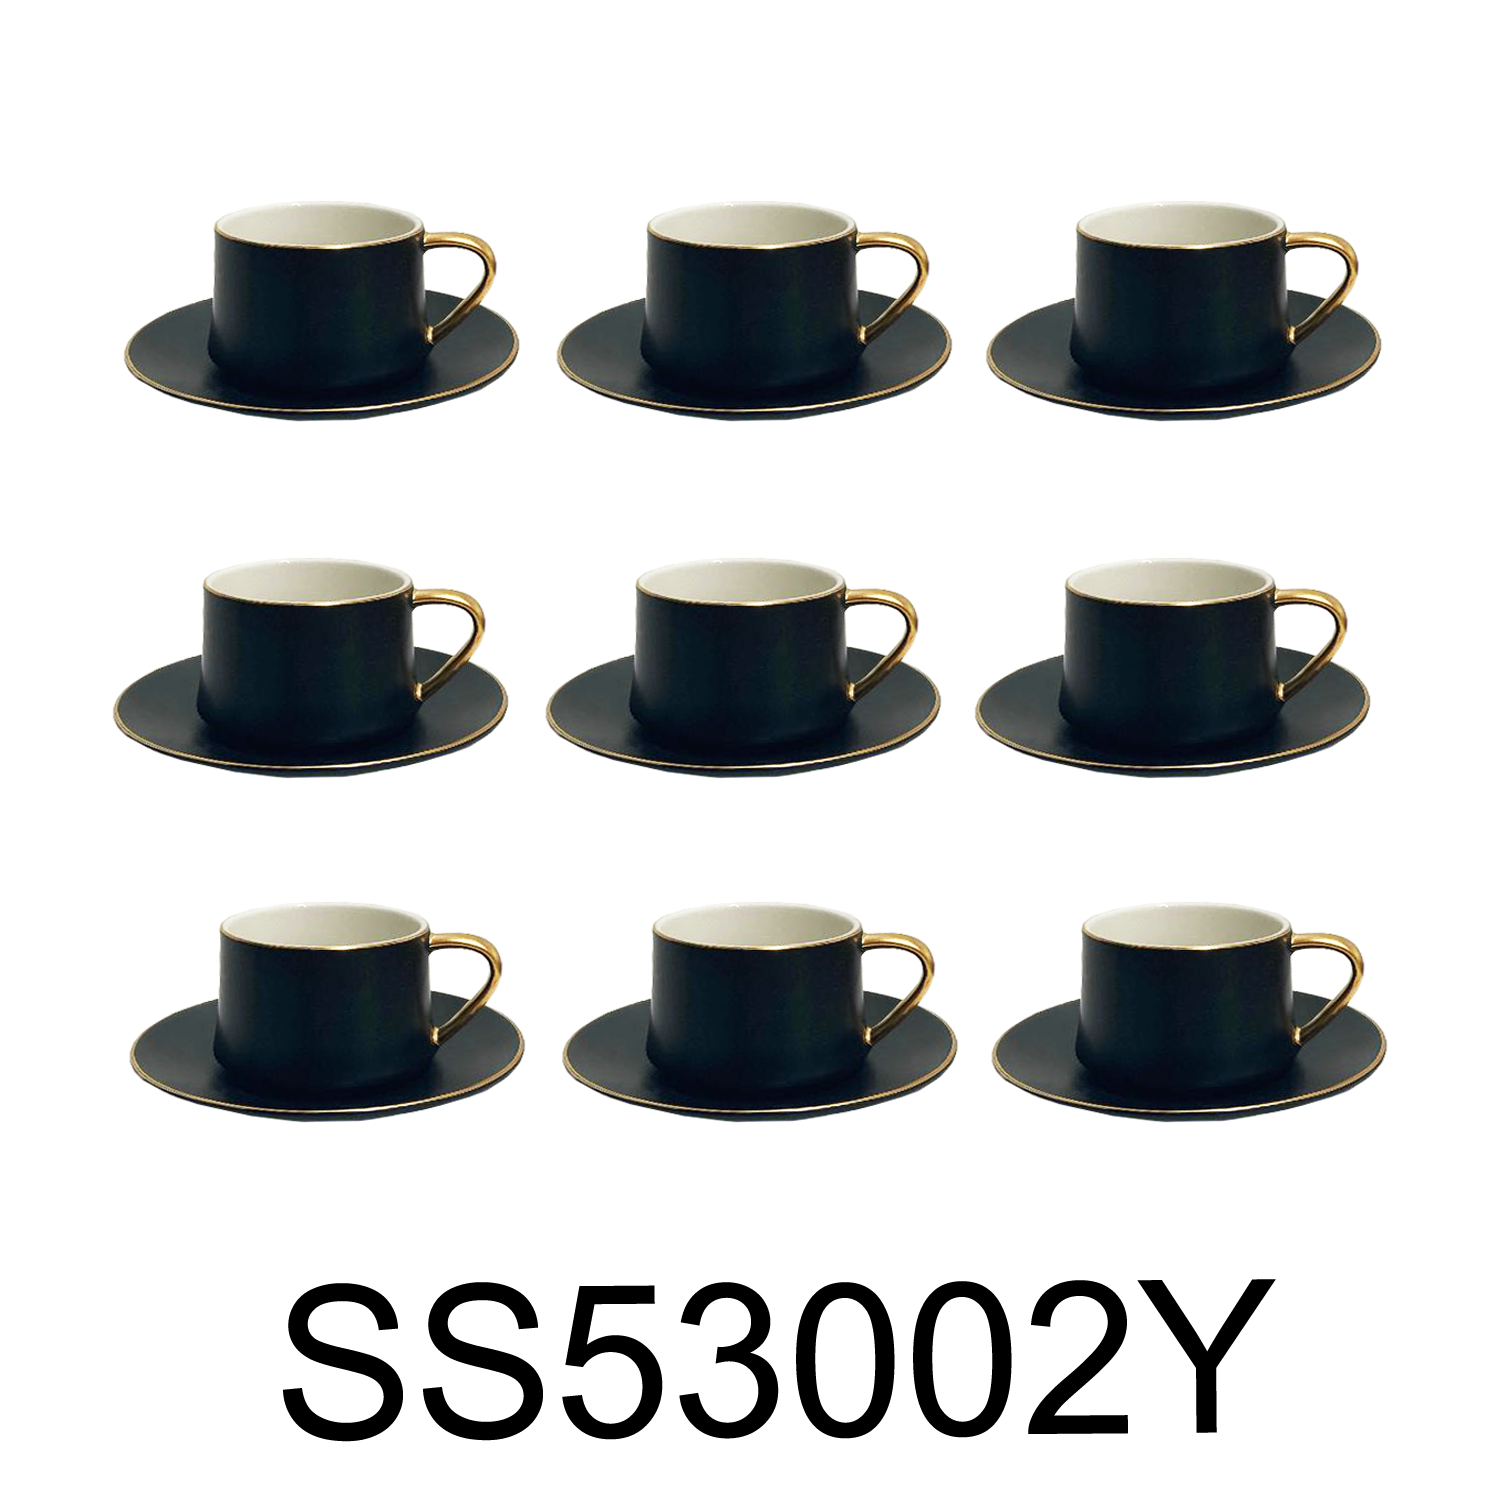 Espresso Cups With Saucers, Matte Black and White, Handmade